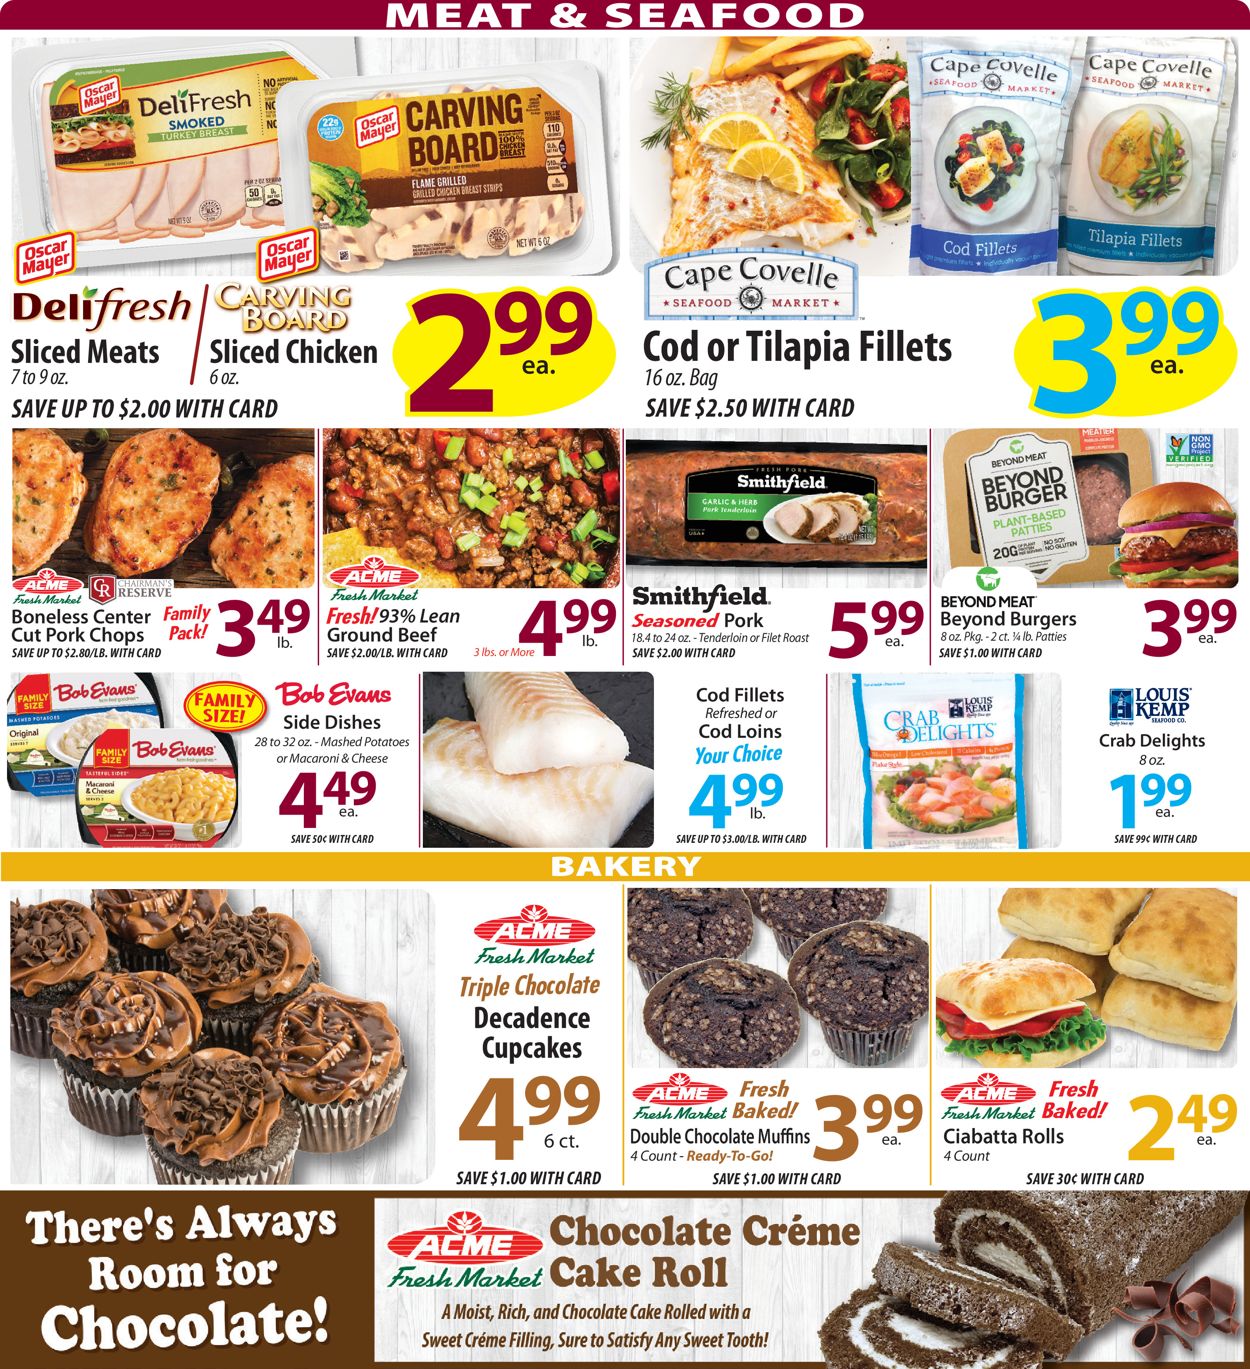 Acme Fresh Market Ad from 12/31/2020